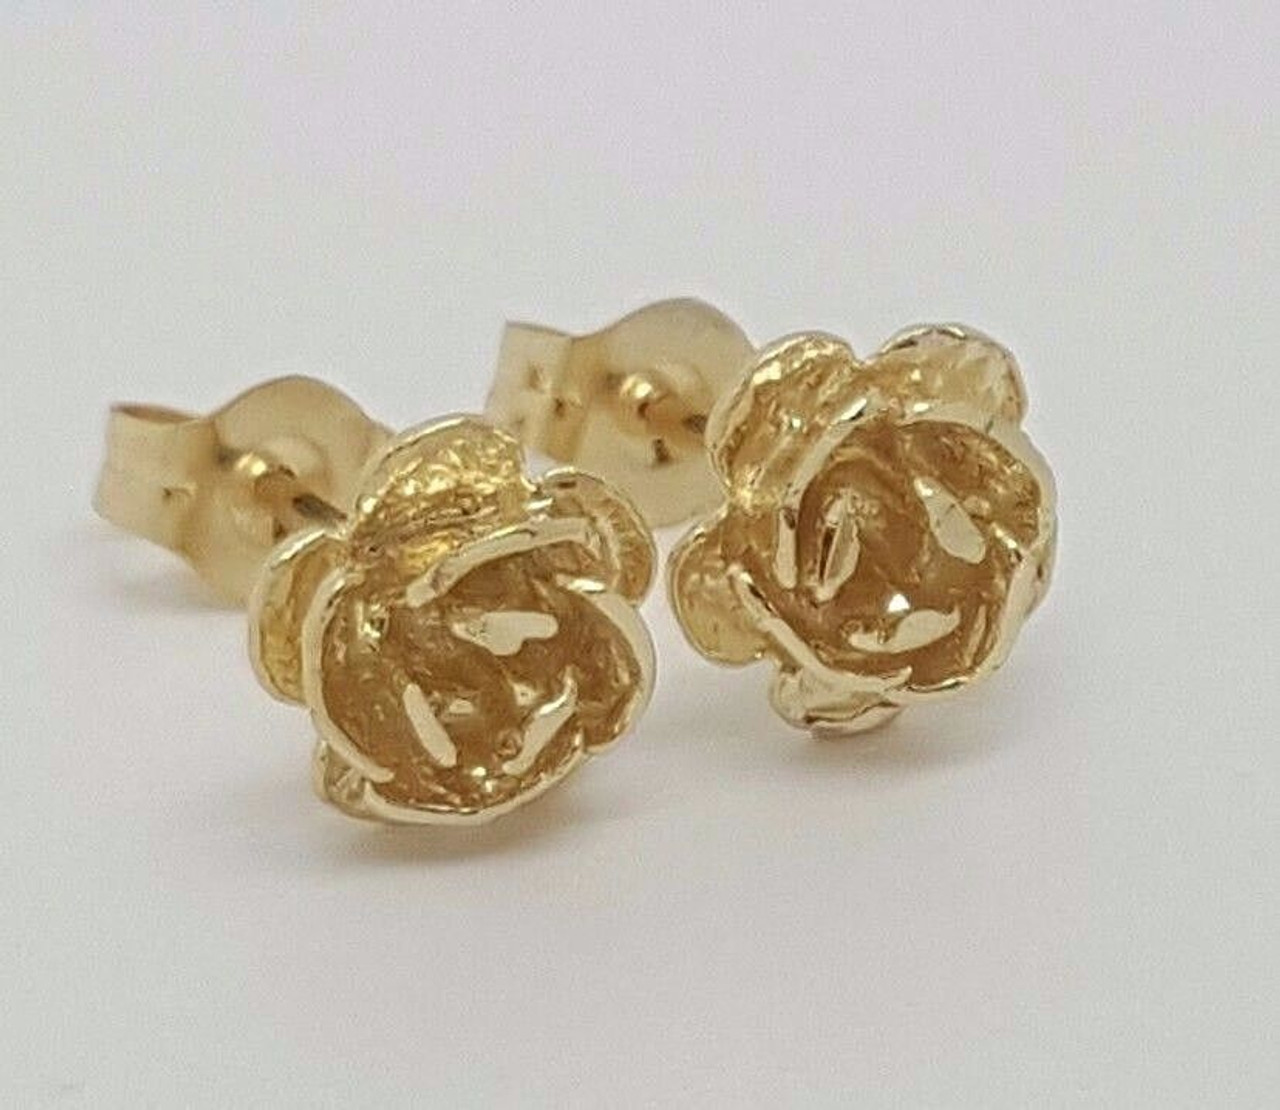 Flower Earring Back Small in Yellow, Rose or White Gold